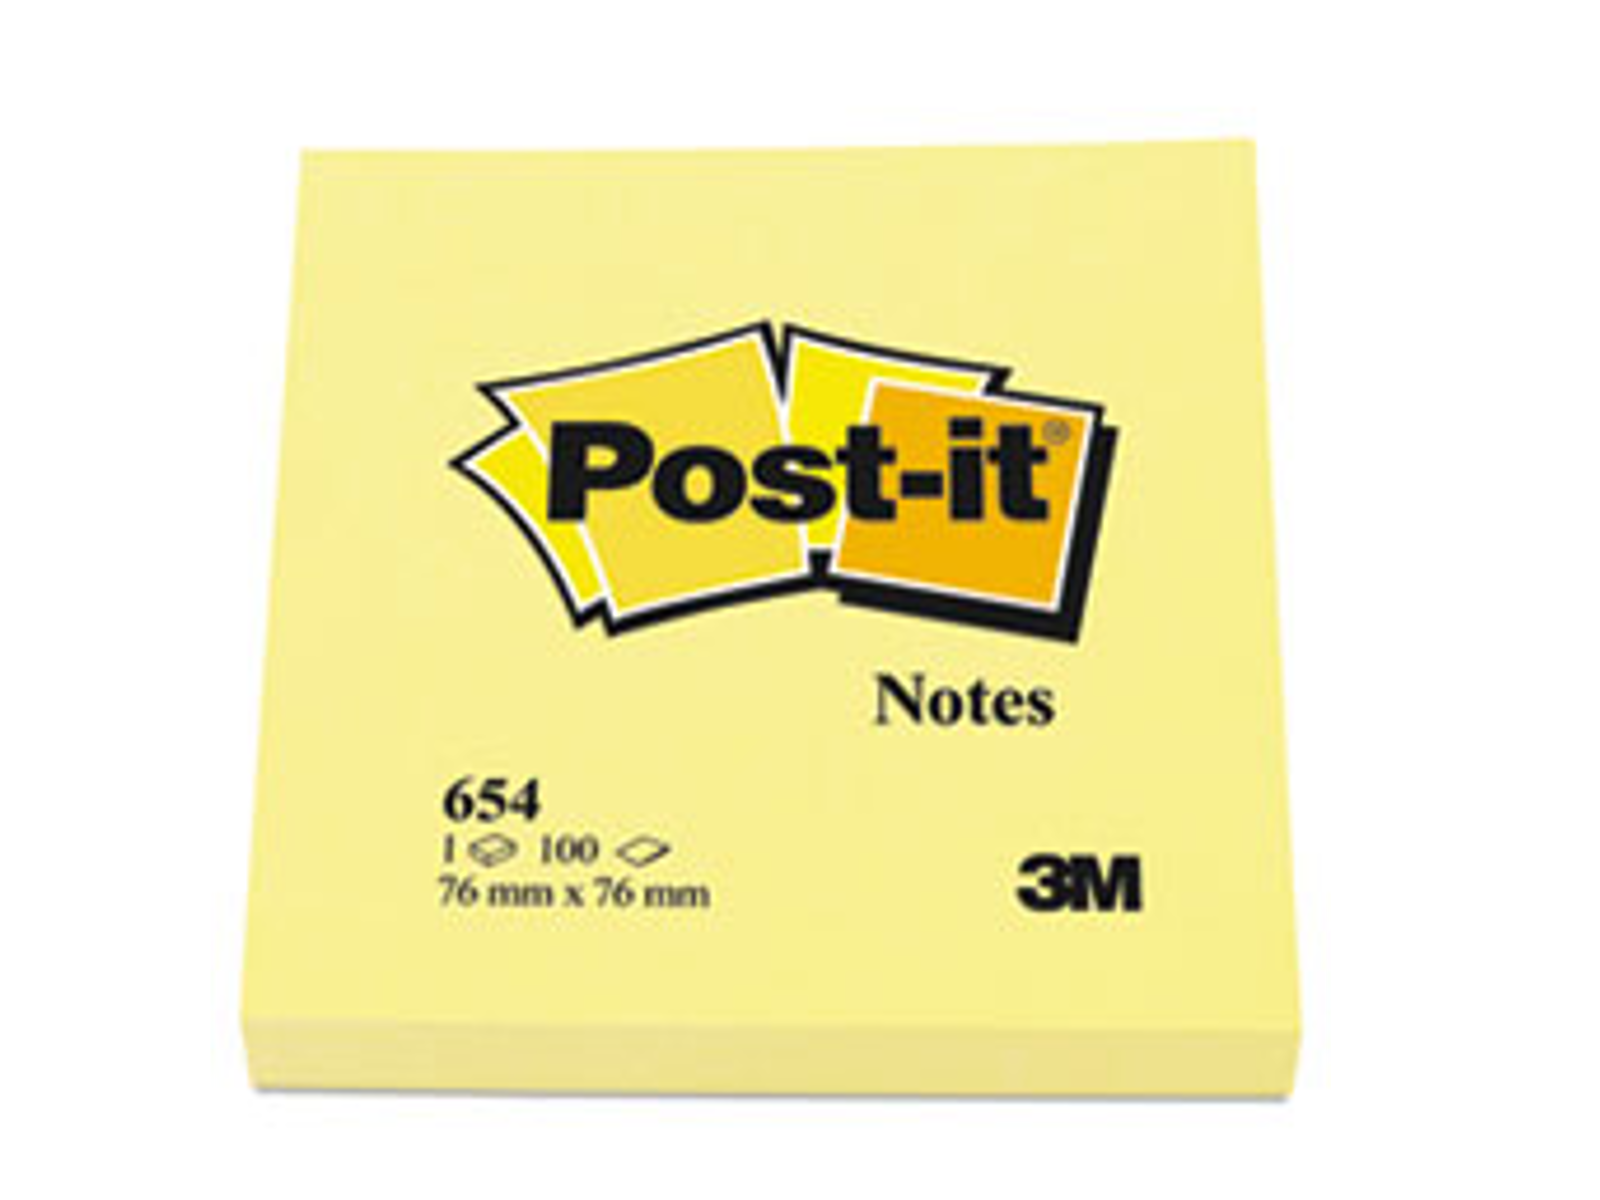 3M/COMMERCIAL ORIGINAL PADS IN
CANARY YELLOW, 3 X 3, 100
SHEET, 12/PACK